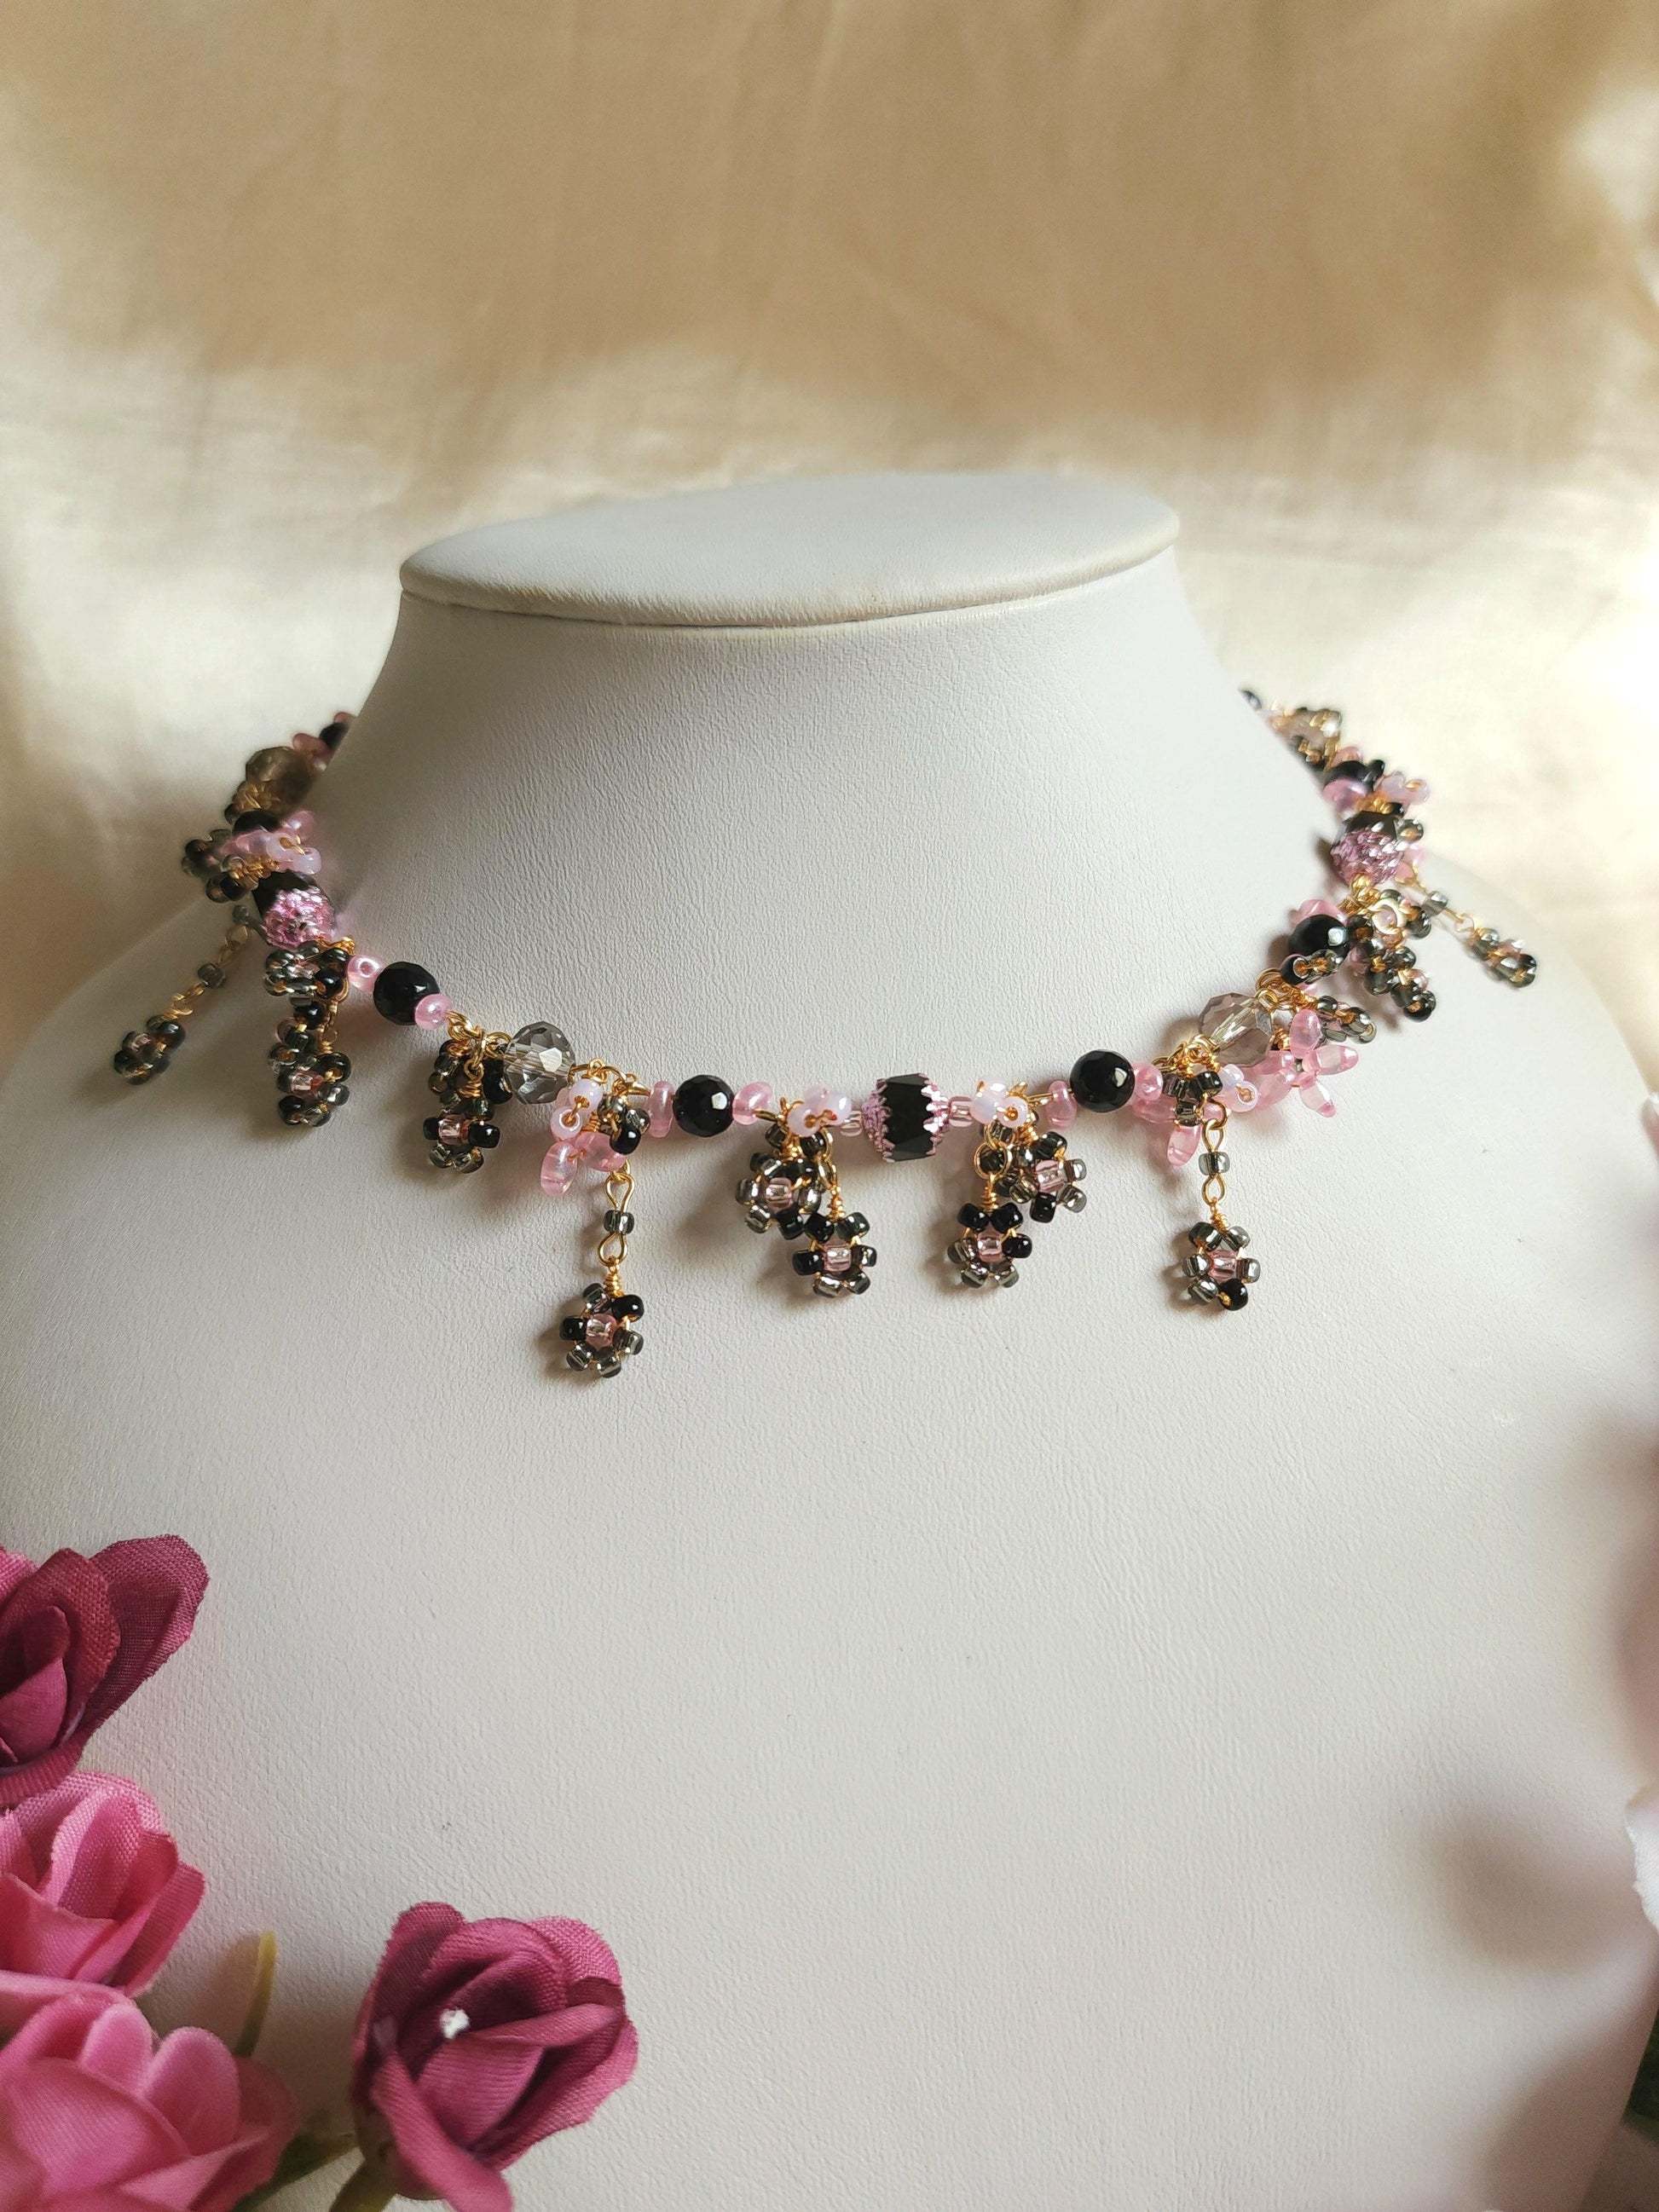 Night Roses Garden Necklace - By Cocoyu